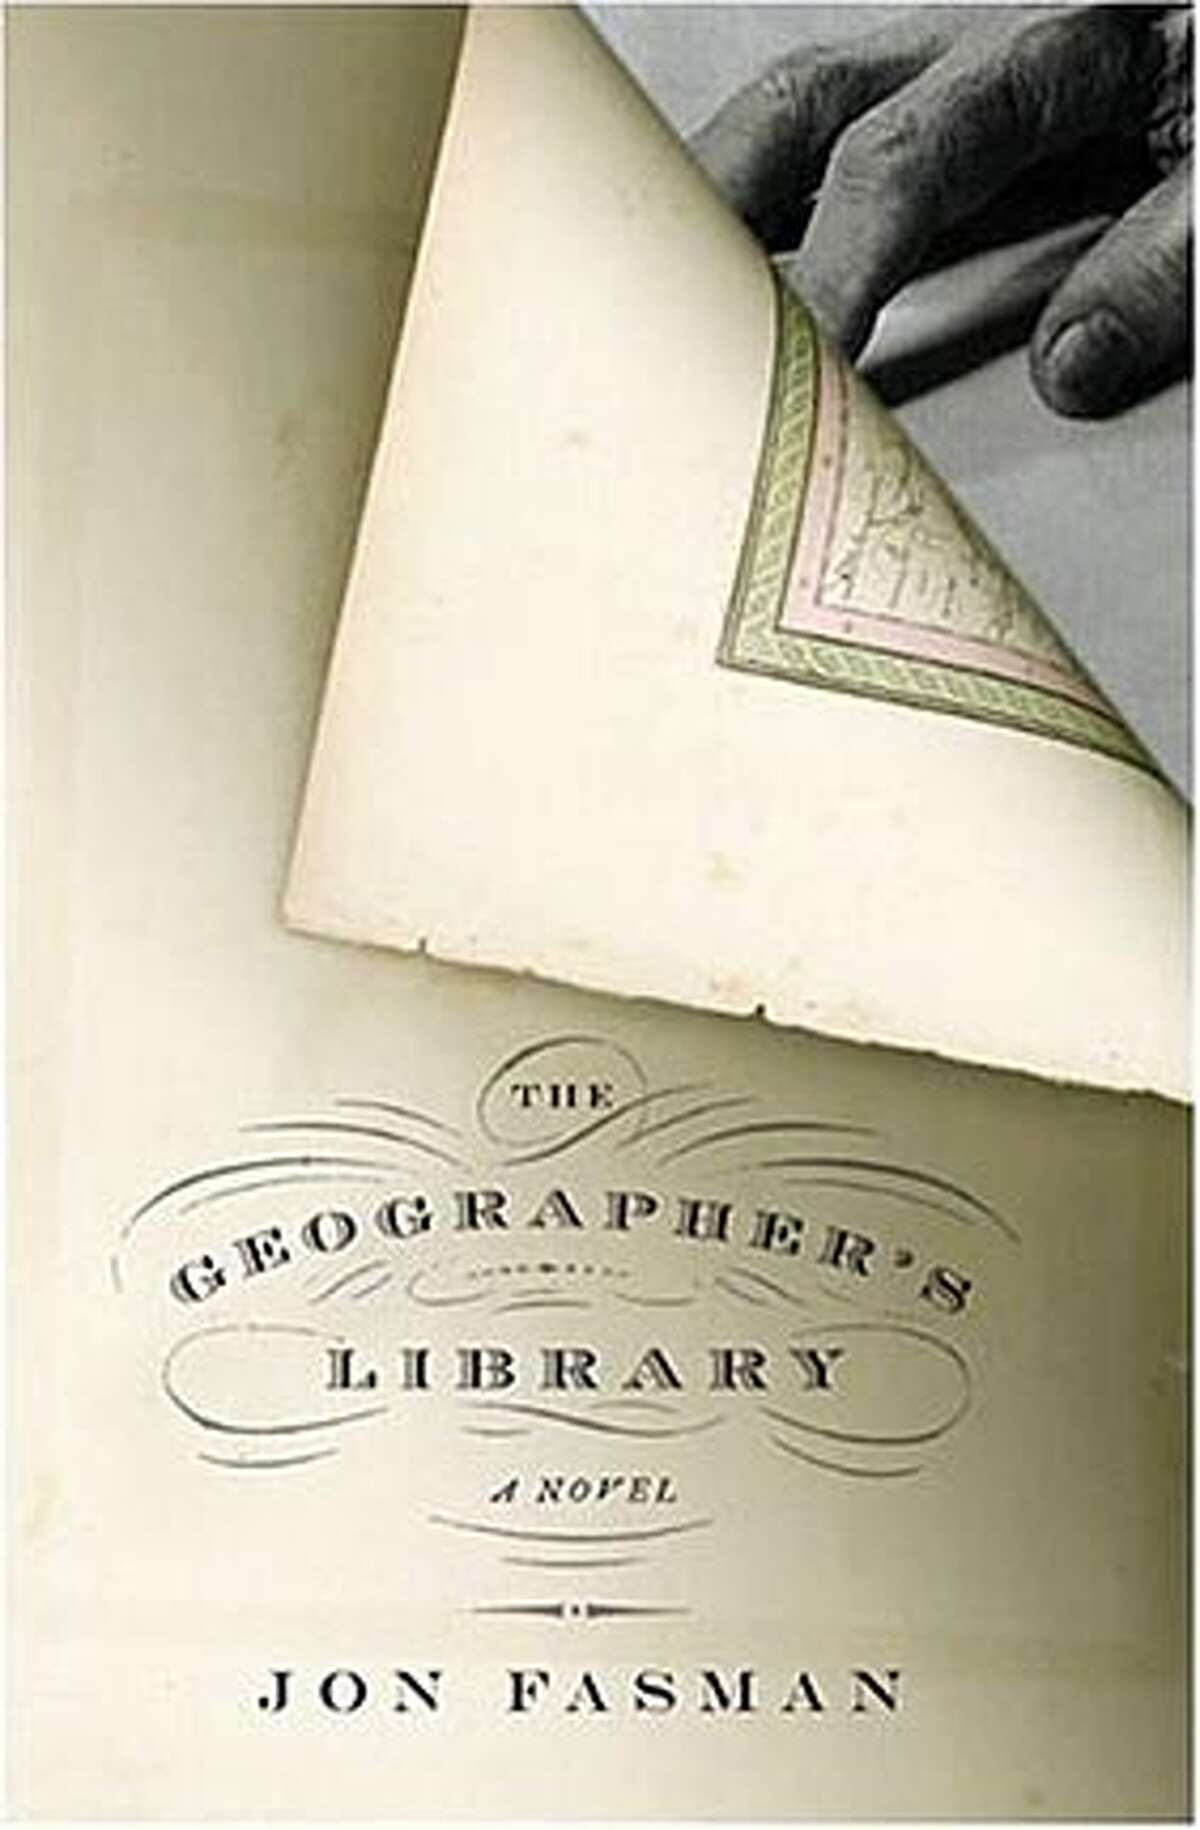 Book cover art for, "The Geographer's Library" by Jon Fasman.